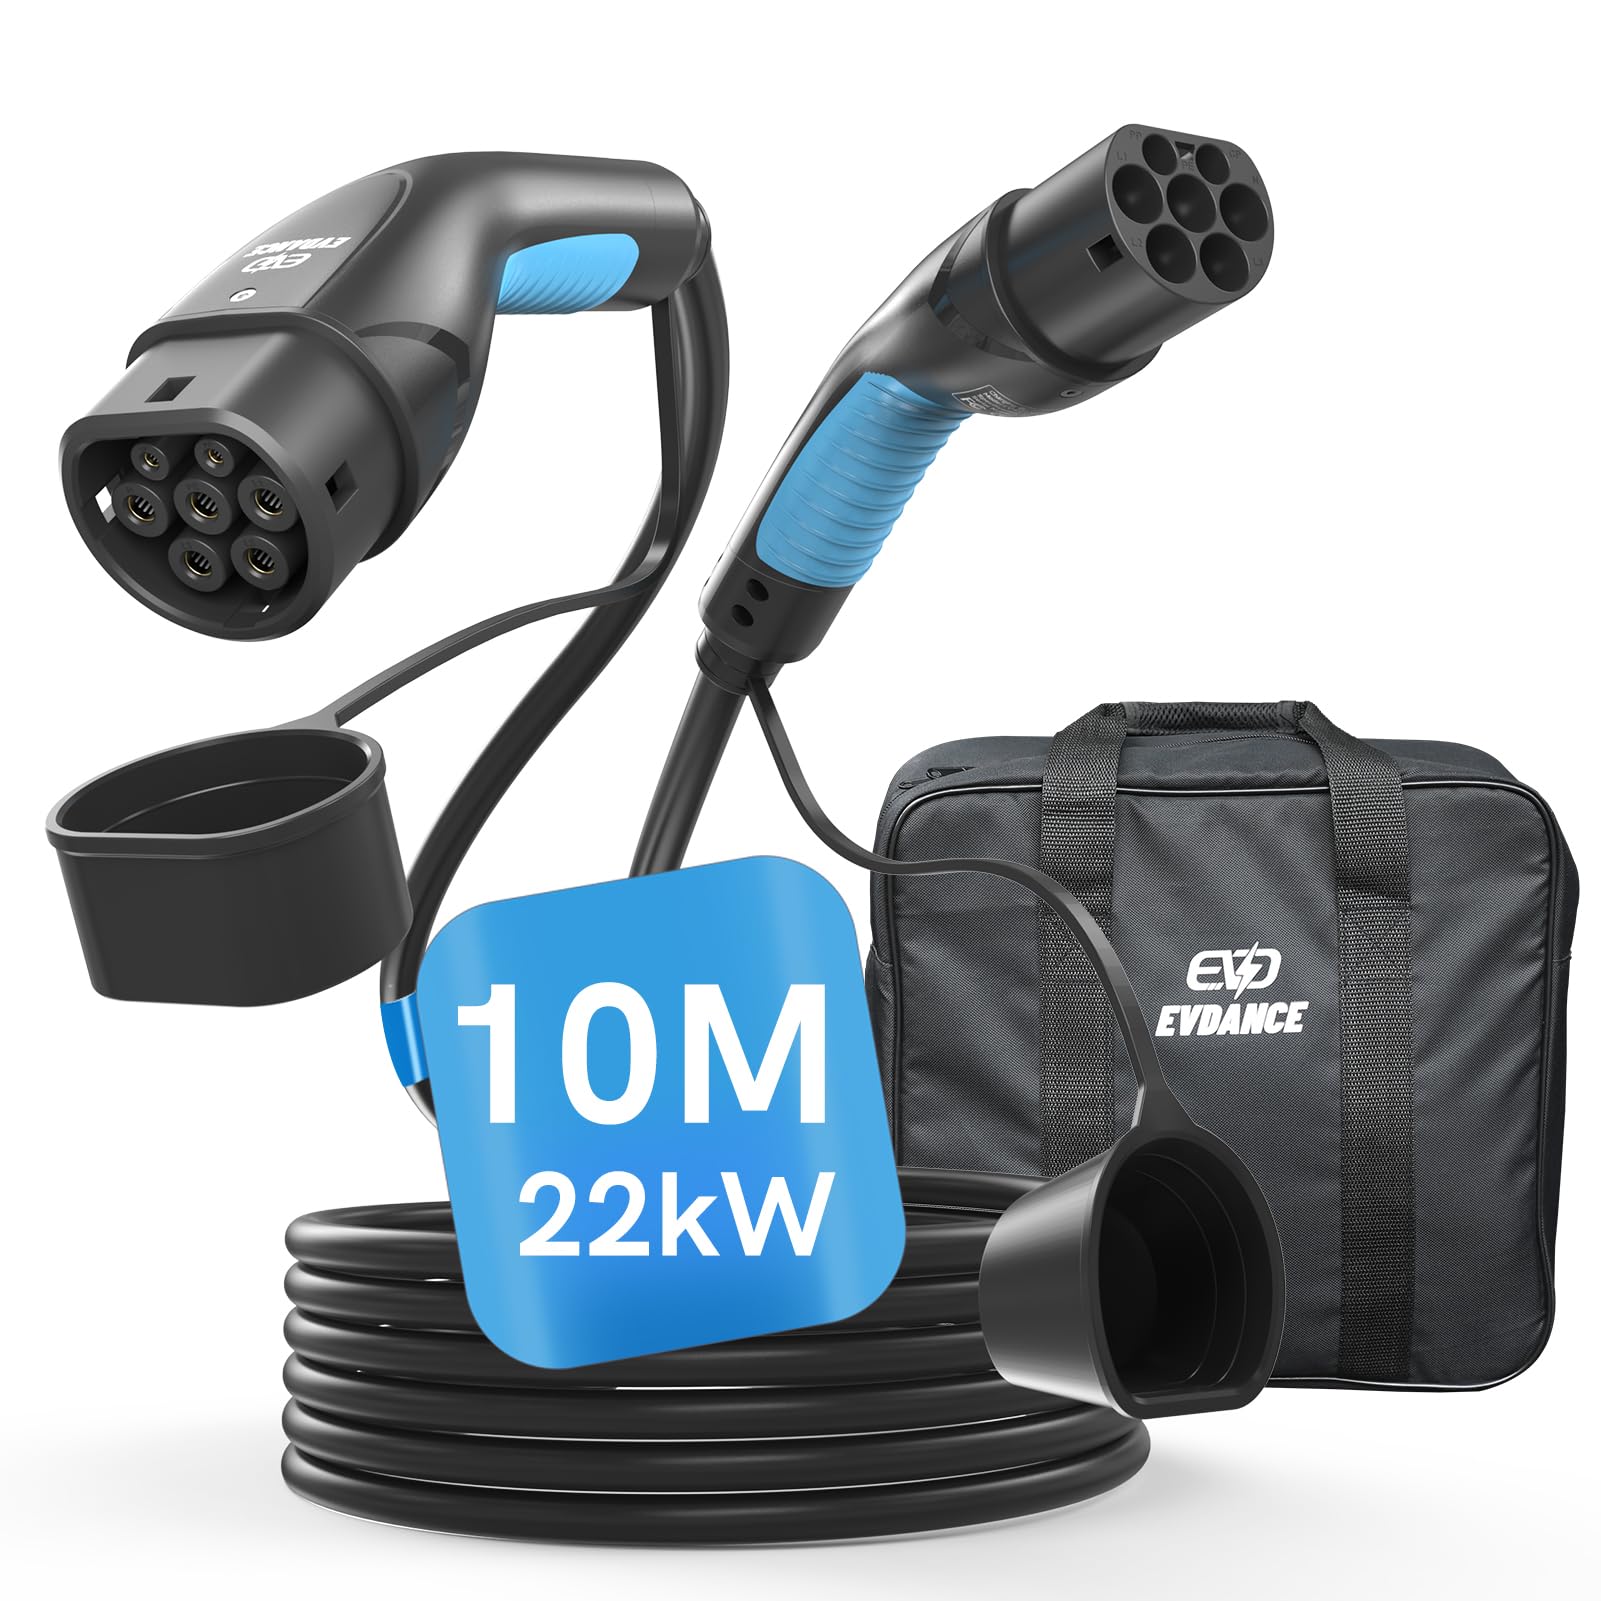 EVDANCE Type 2 to Type 2 Charging Cable for E Car EV/PHEV